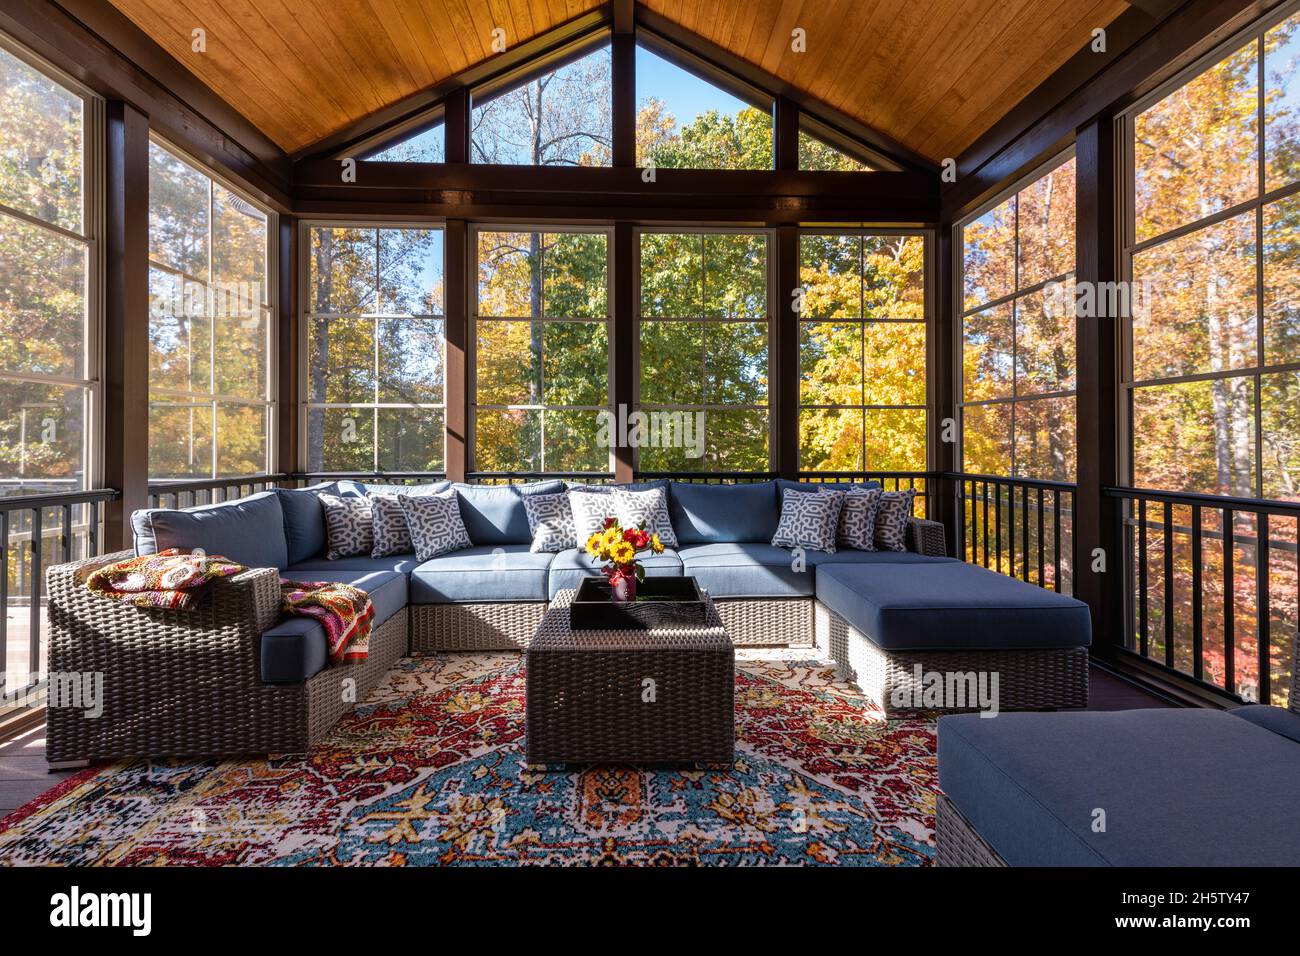 New modern screened porch with patio furniture, summertime woods in the background. Stock Photo